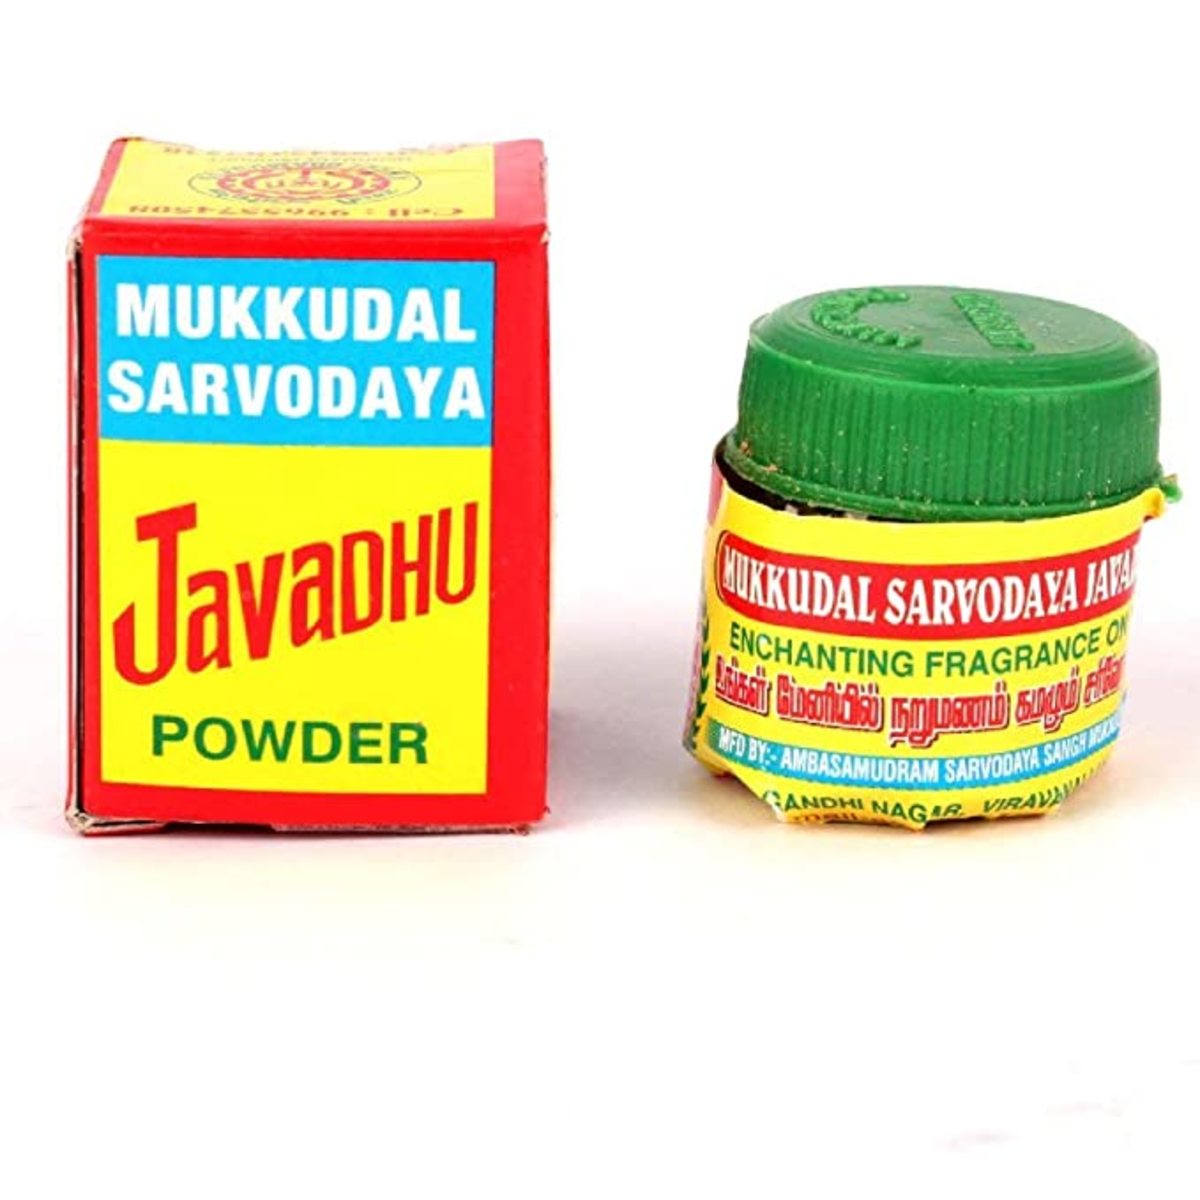 Javadhu Powder is a Combination of Sandalwood Oil, Sandalwood Powder with herbs and flowers.